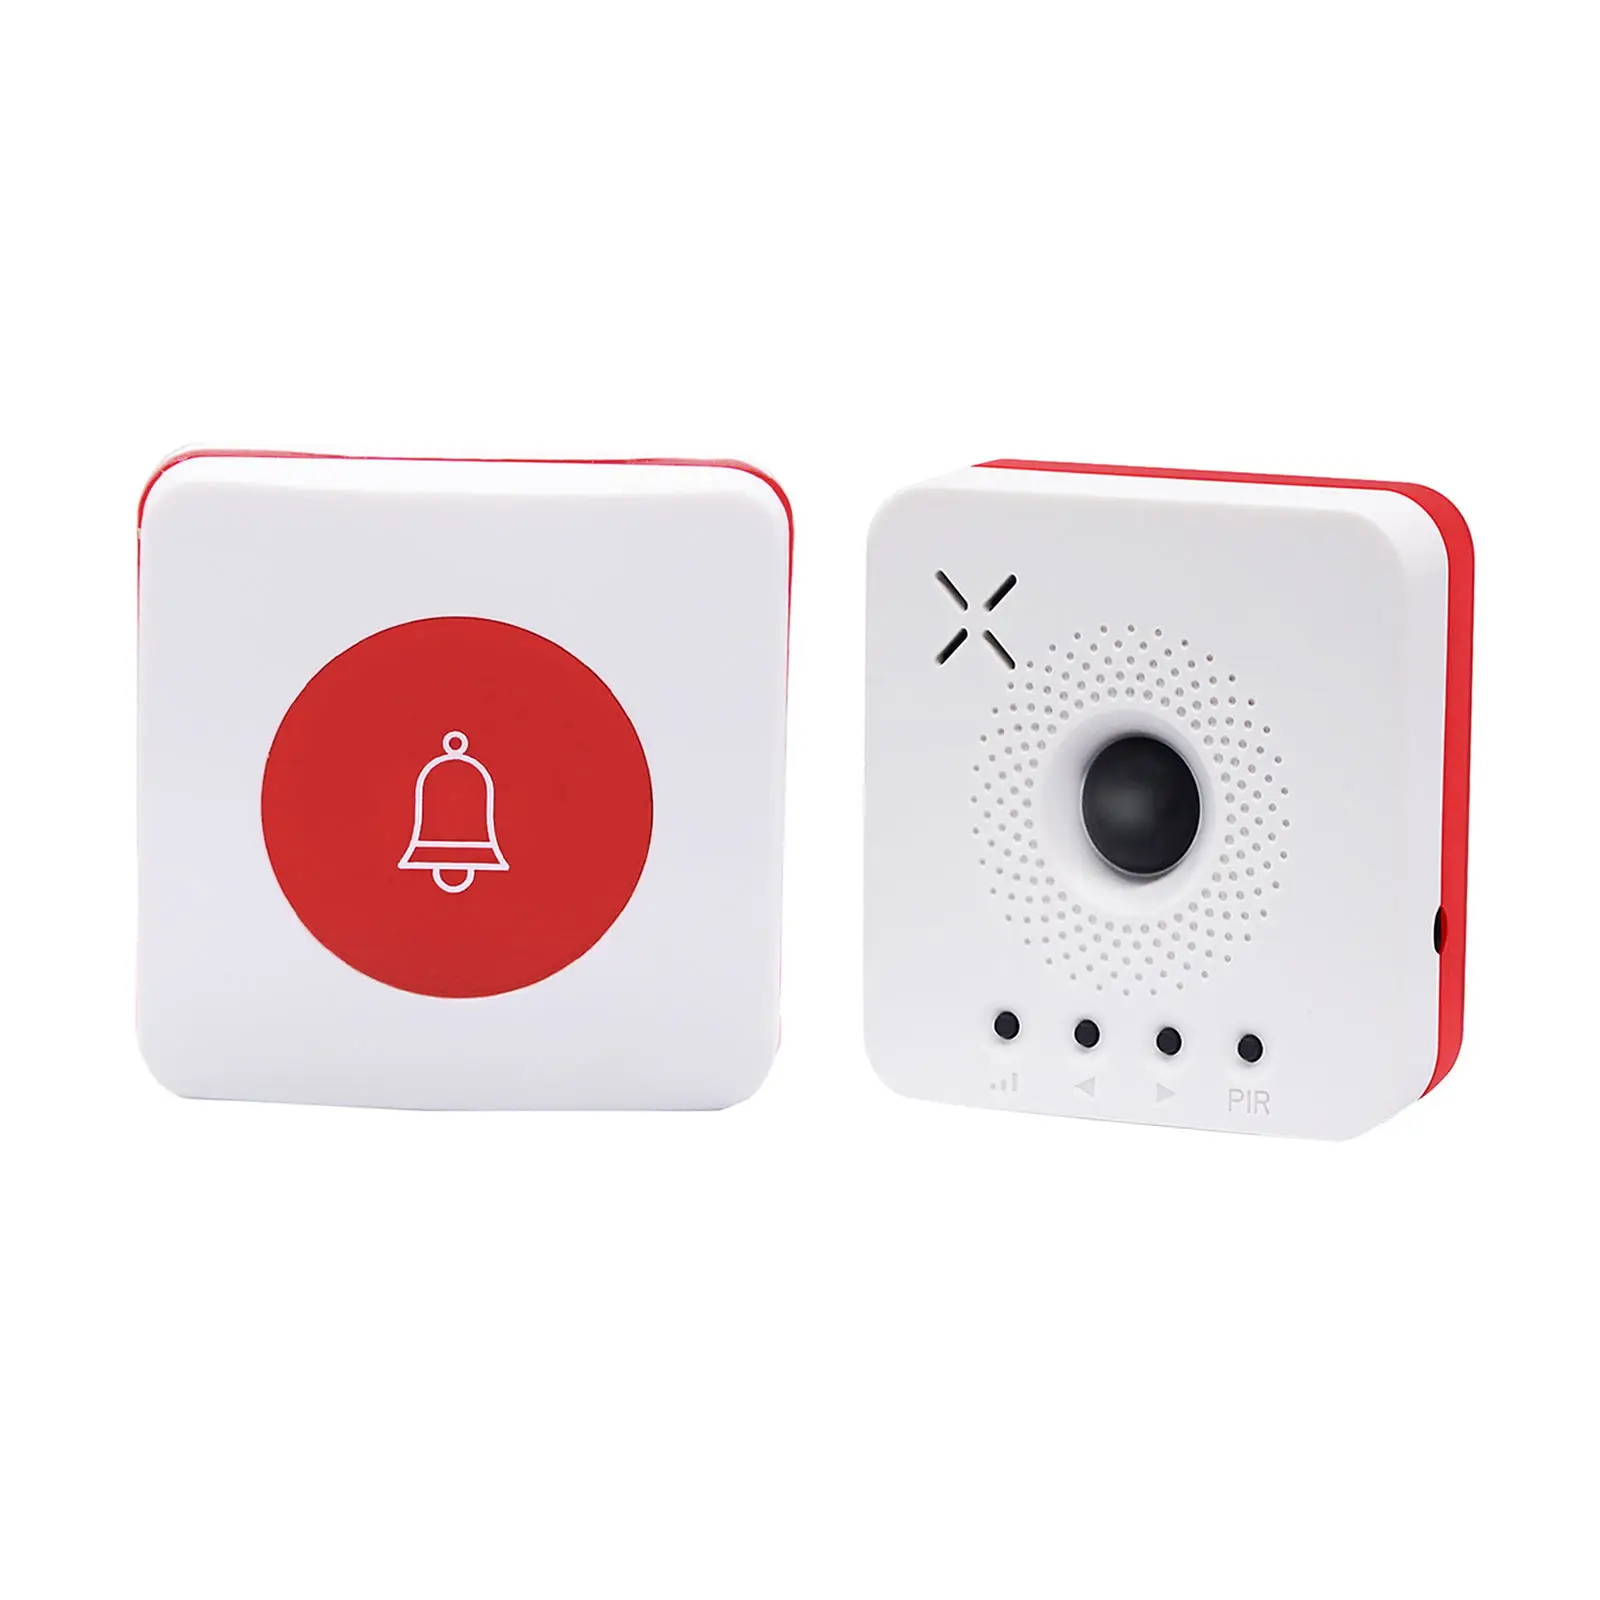 Caregiver Pager Wireless Doorbell Call Button Nurse Call Alert Patient Help System for Elderly Patient with USB